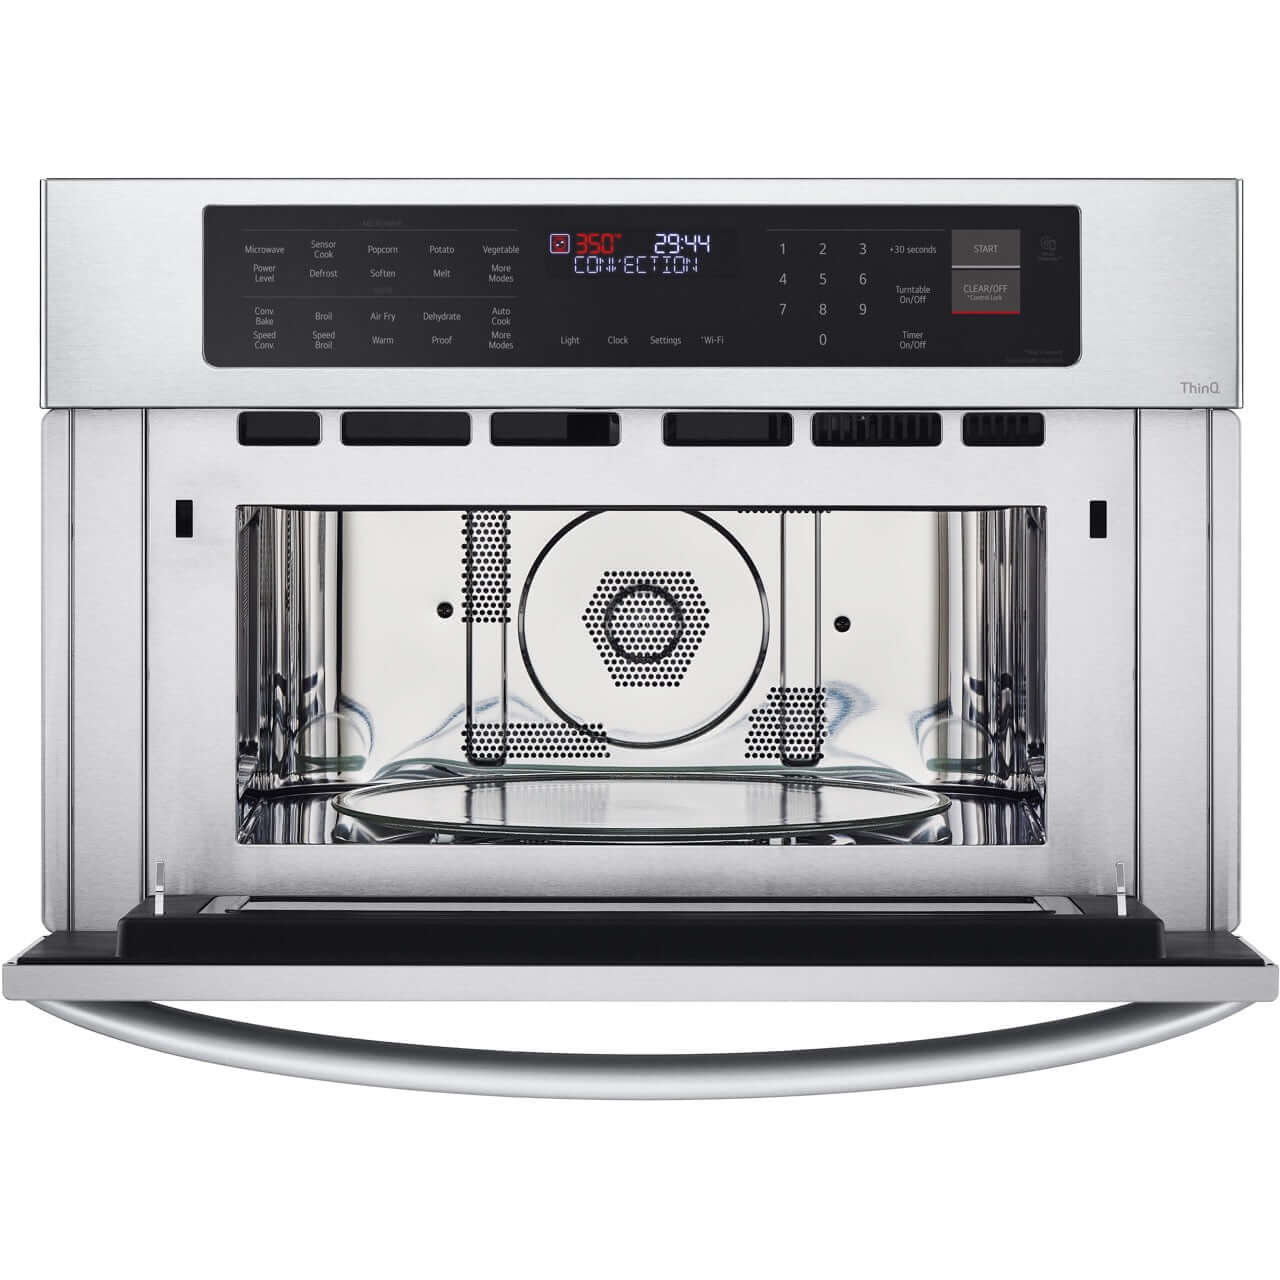 LG 30 in. 1.7-Cu. Ft. Smart Wi-Fi Enabled Built-In Speed Oven and Microwave in Print Proof Stainless Steel (MZBZ1715S)